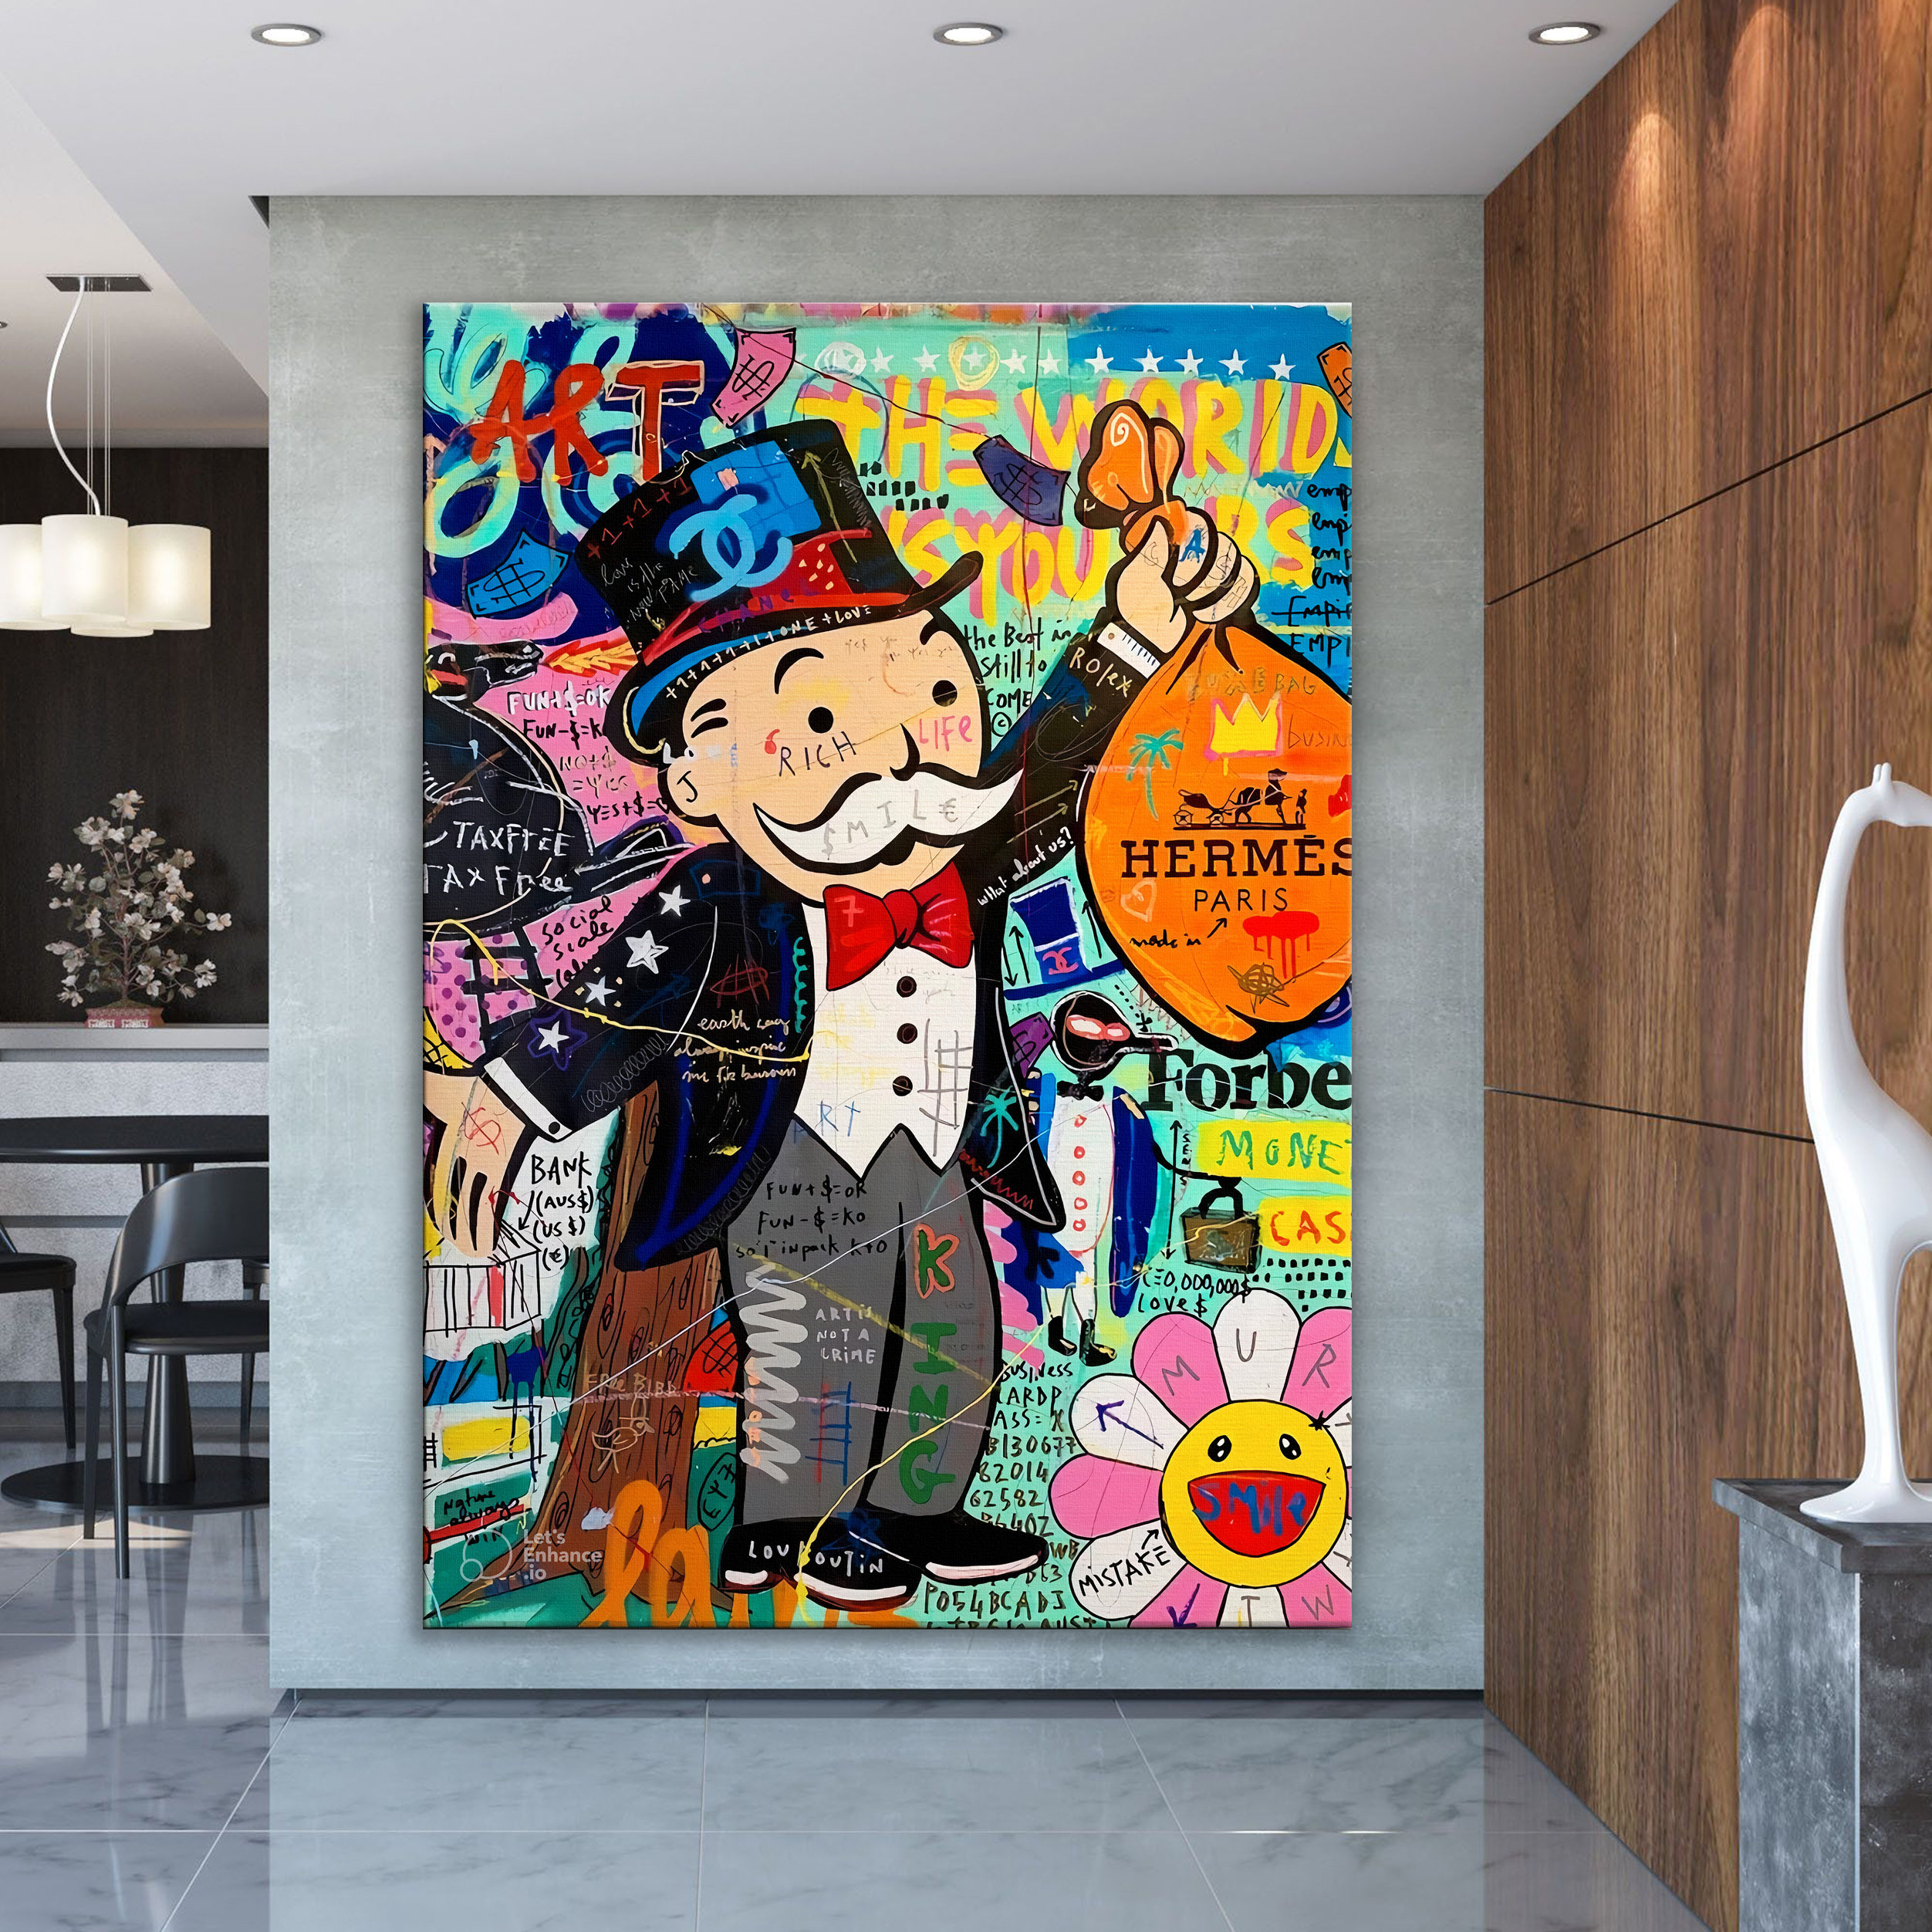 Alec Monopoly Art Canvas Painting Monopoly and Richie $ Bags Poster Luxury  Wall Art Pictures for Home Living Room Decor No Frame